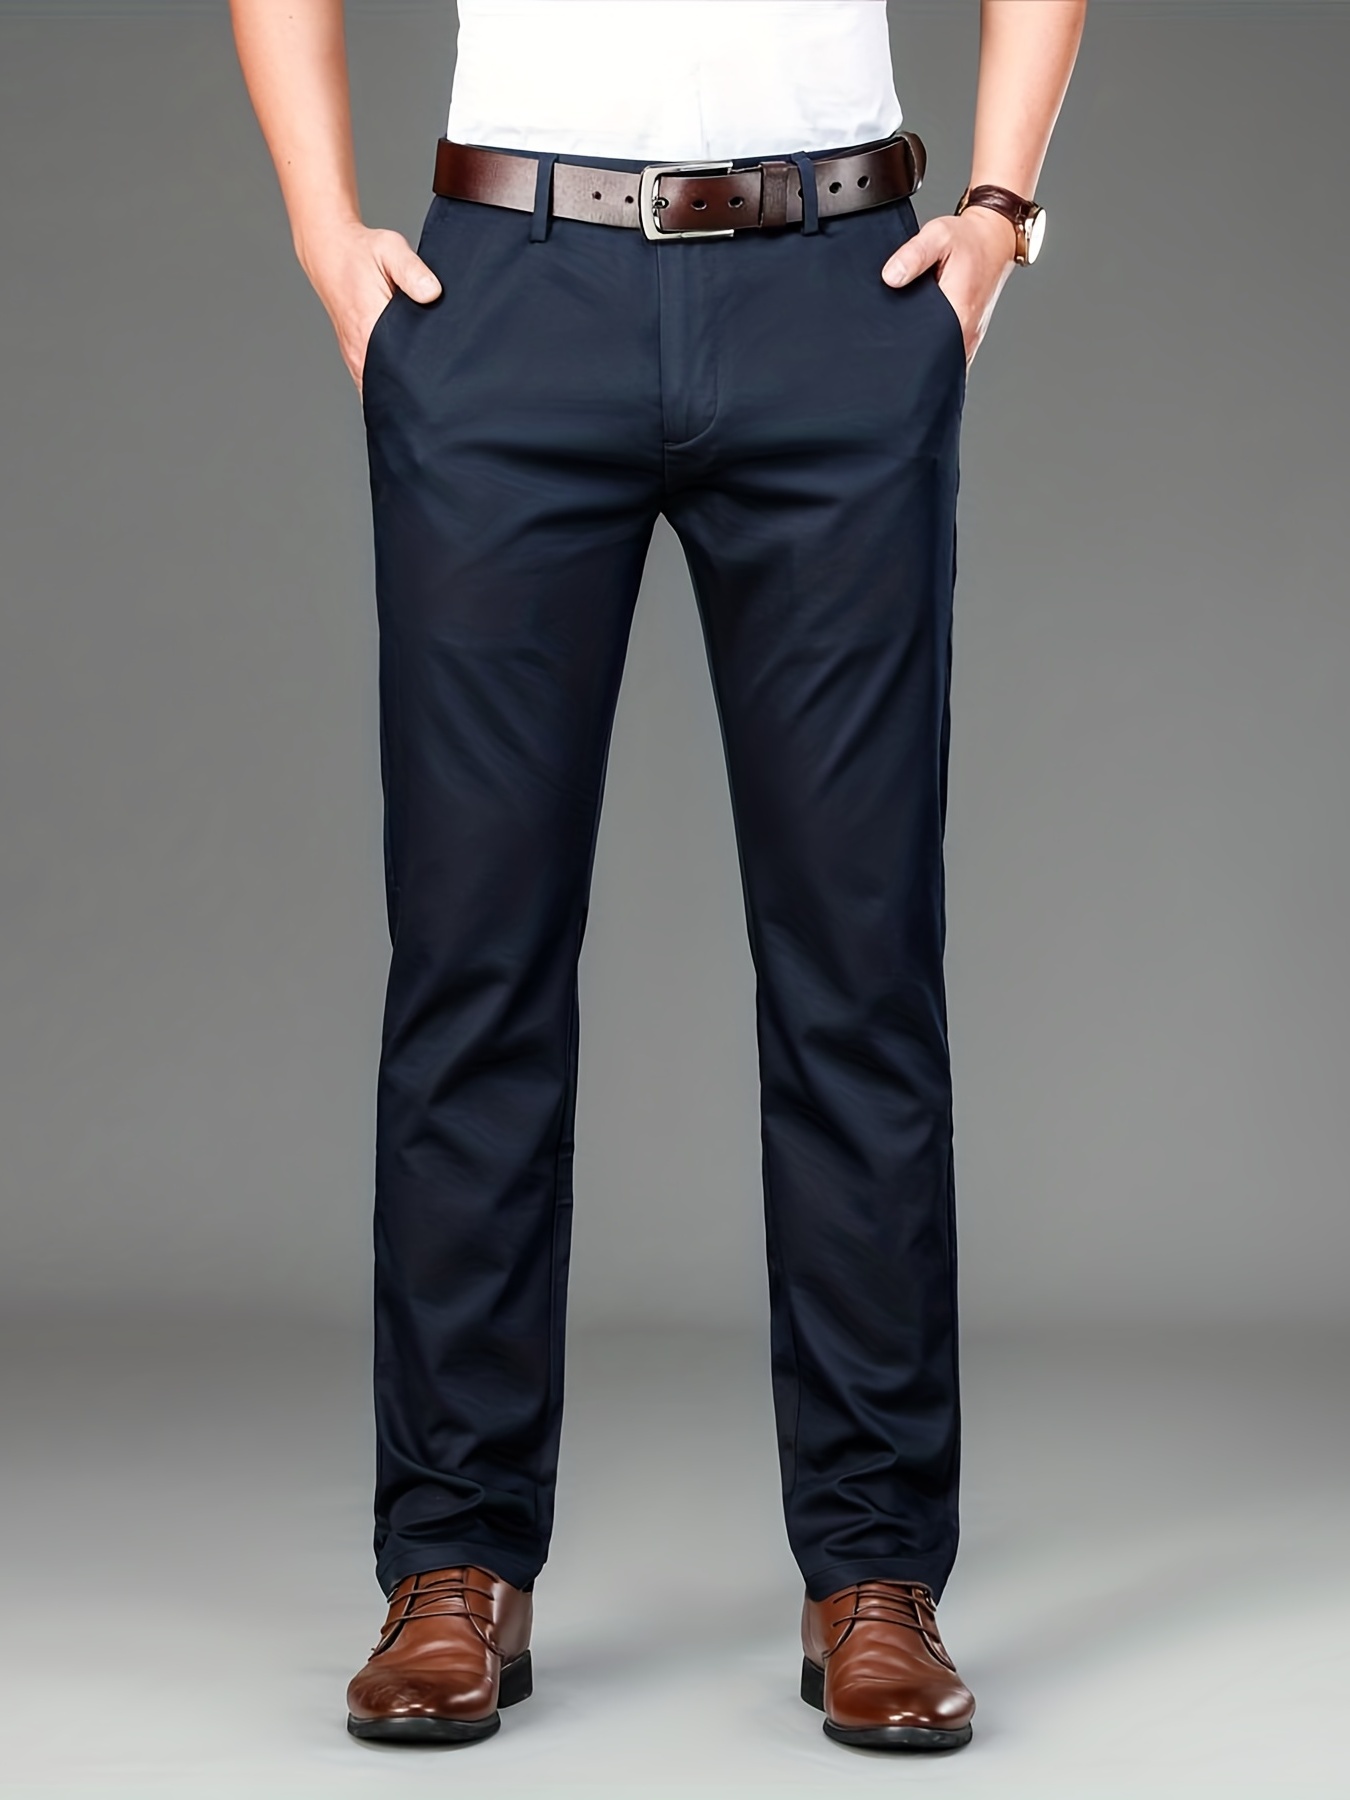 Twowood Men Fashion Solid Color Stretchy Dress Pants Formal Business  Wedding Trousers 